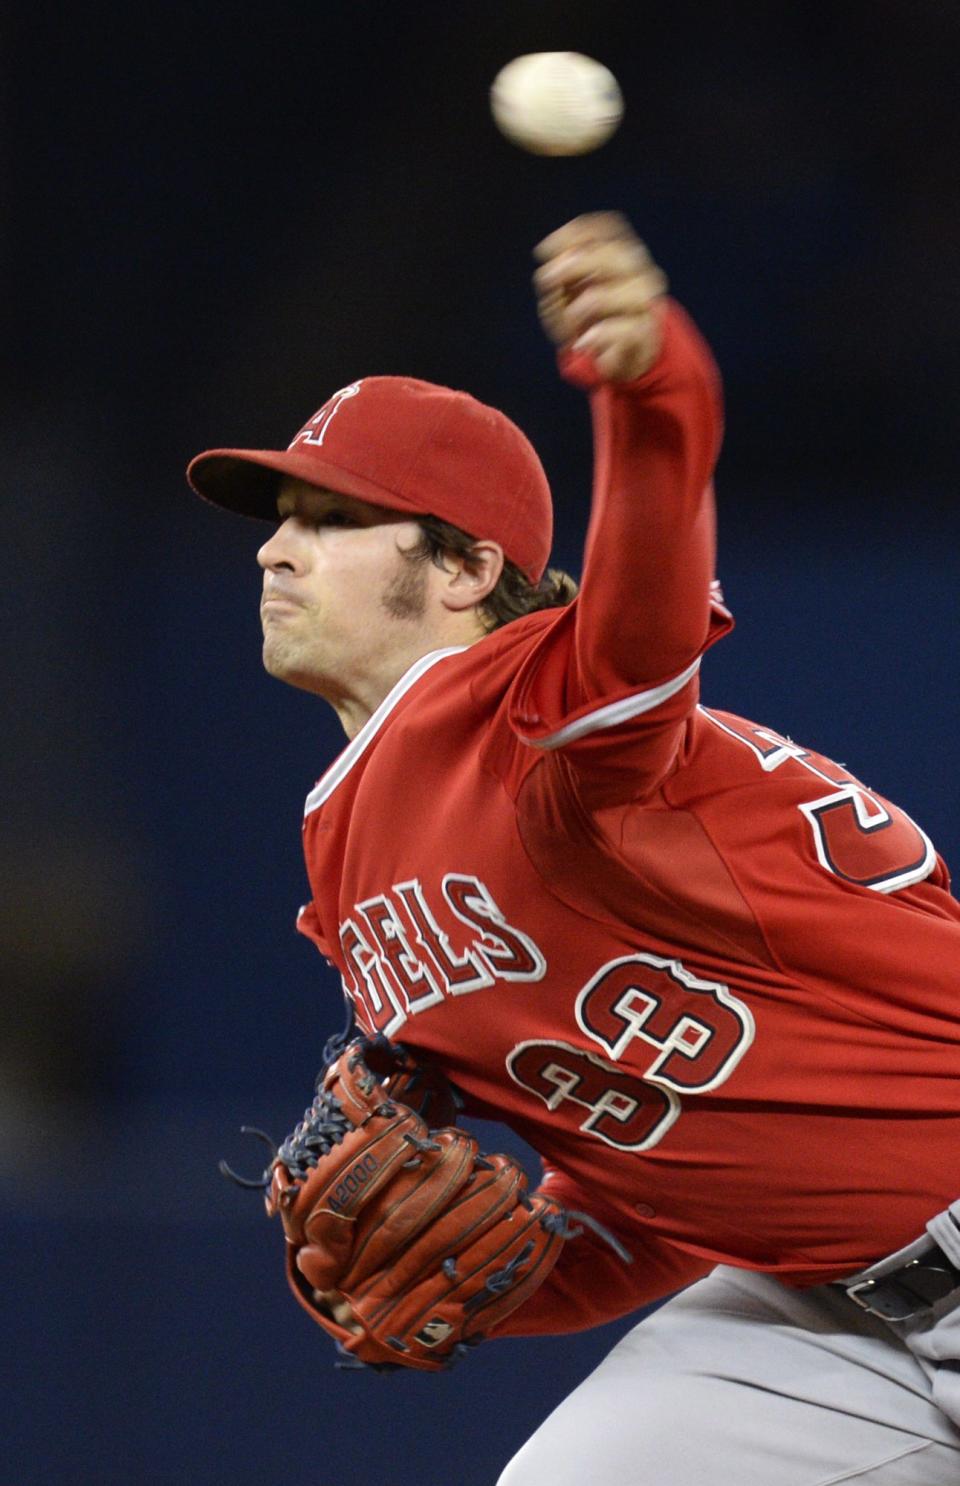 Los Angeles Angels starting pitcher C.J. Wilson pitches against the Toronto Blue Jays during first inning American League baseball action in Toronto on Monday, May 12, 2014. (AP Photo/The Canadian Press, Frank Gunn)